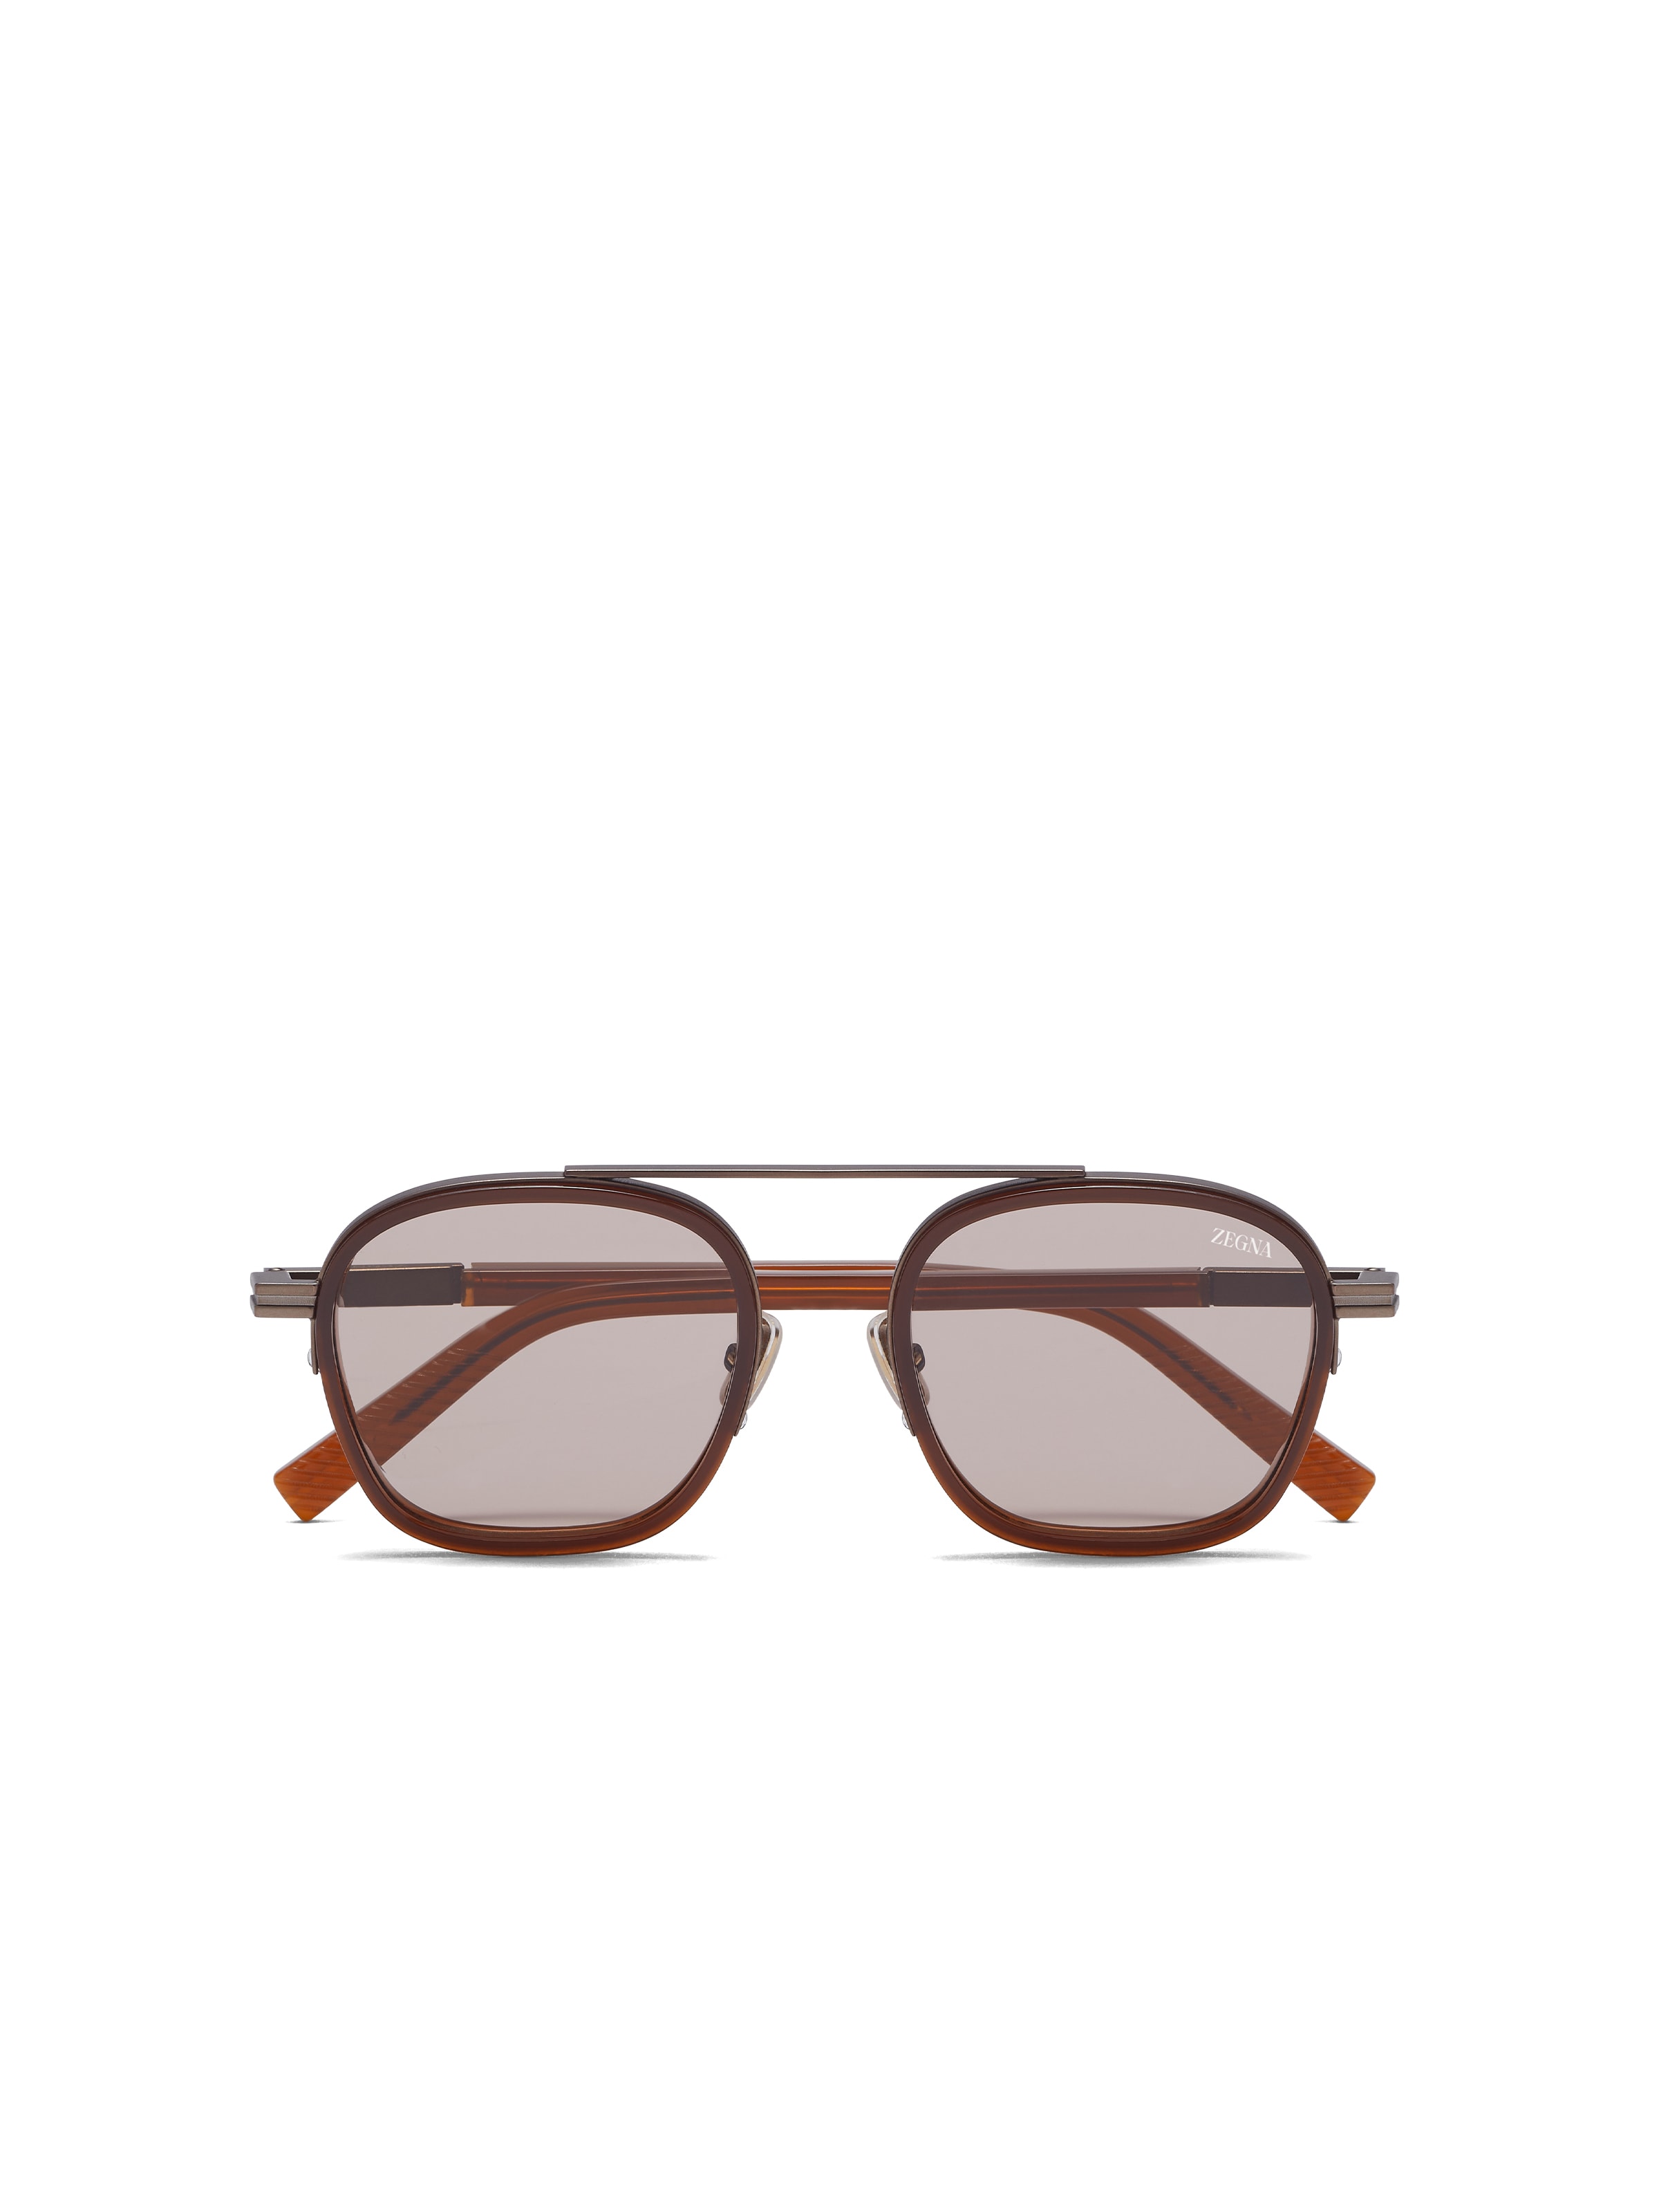 Zegna Opal Brown Orizzonte I Acetate And Metal Sunglasses